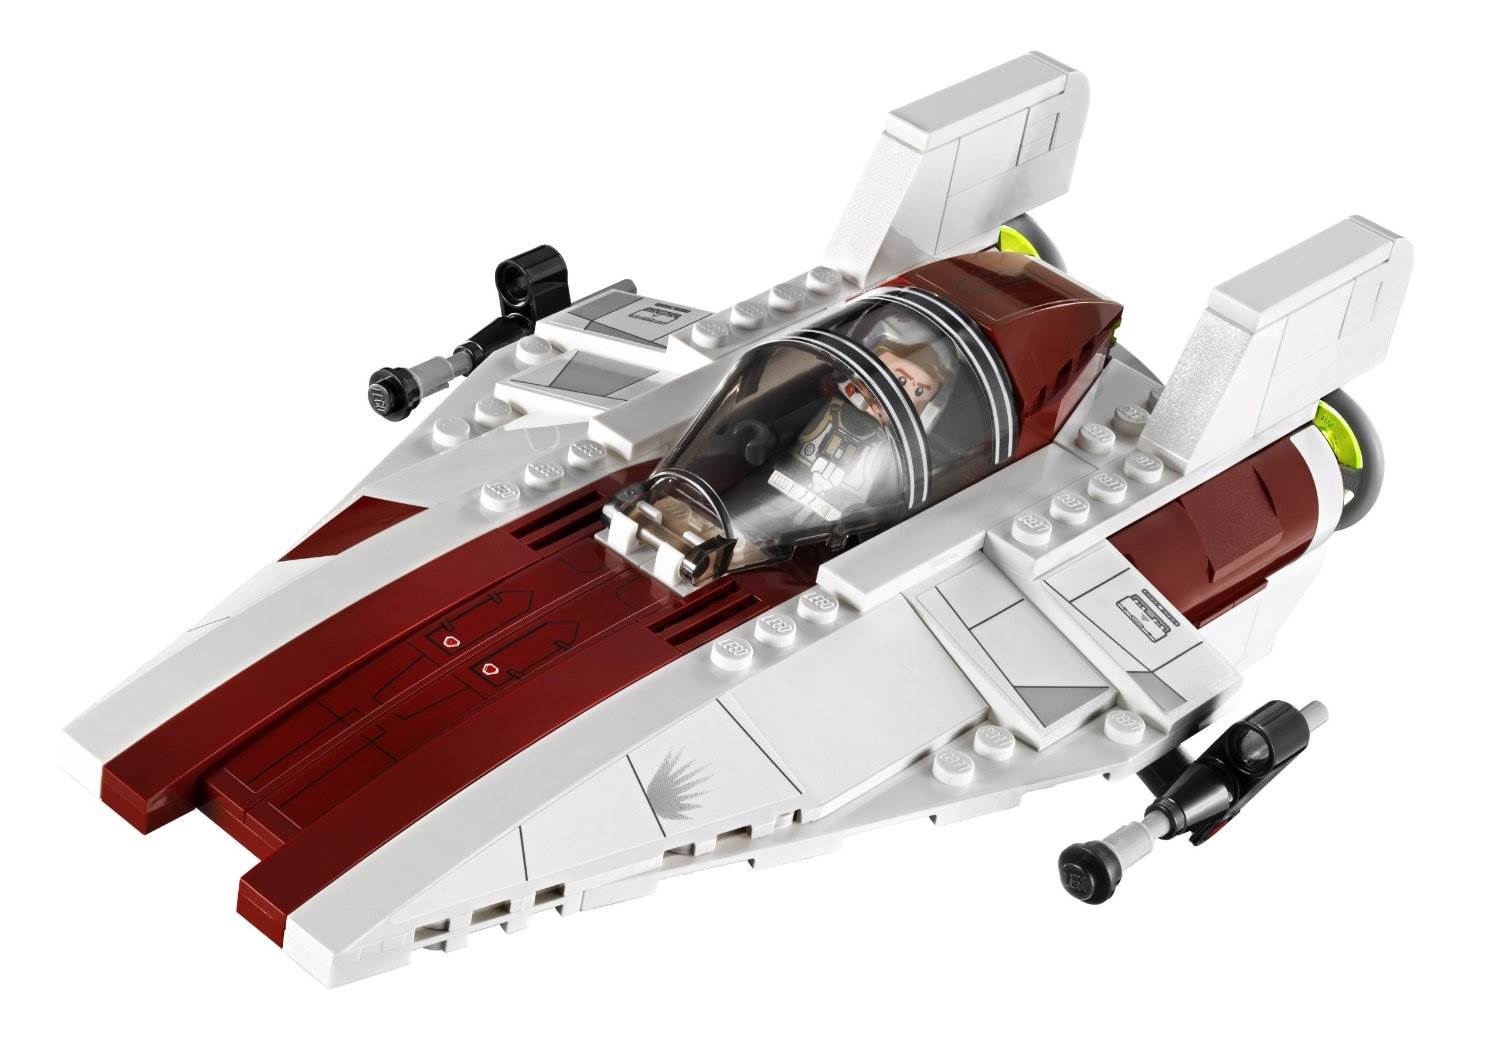 LEGO Star Wars A-wing Starfighter Play Set - image 5 of 7